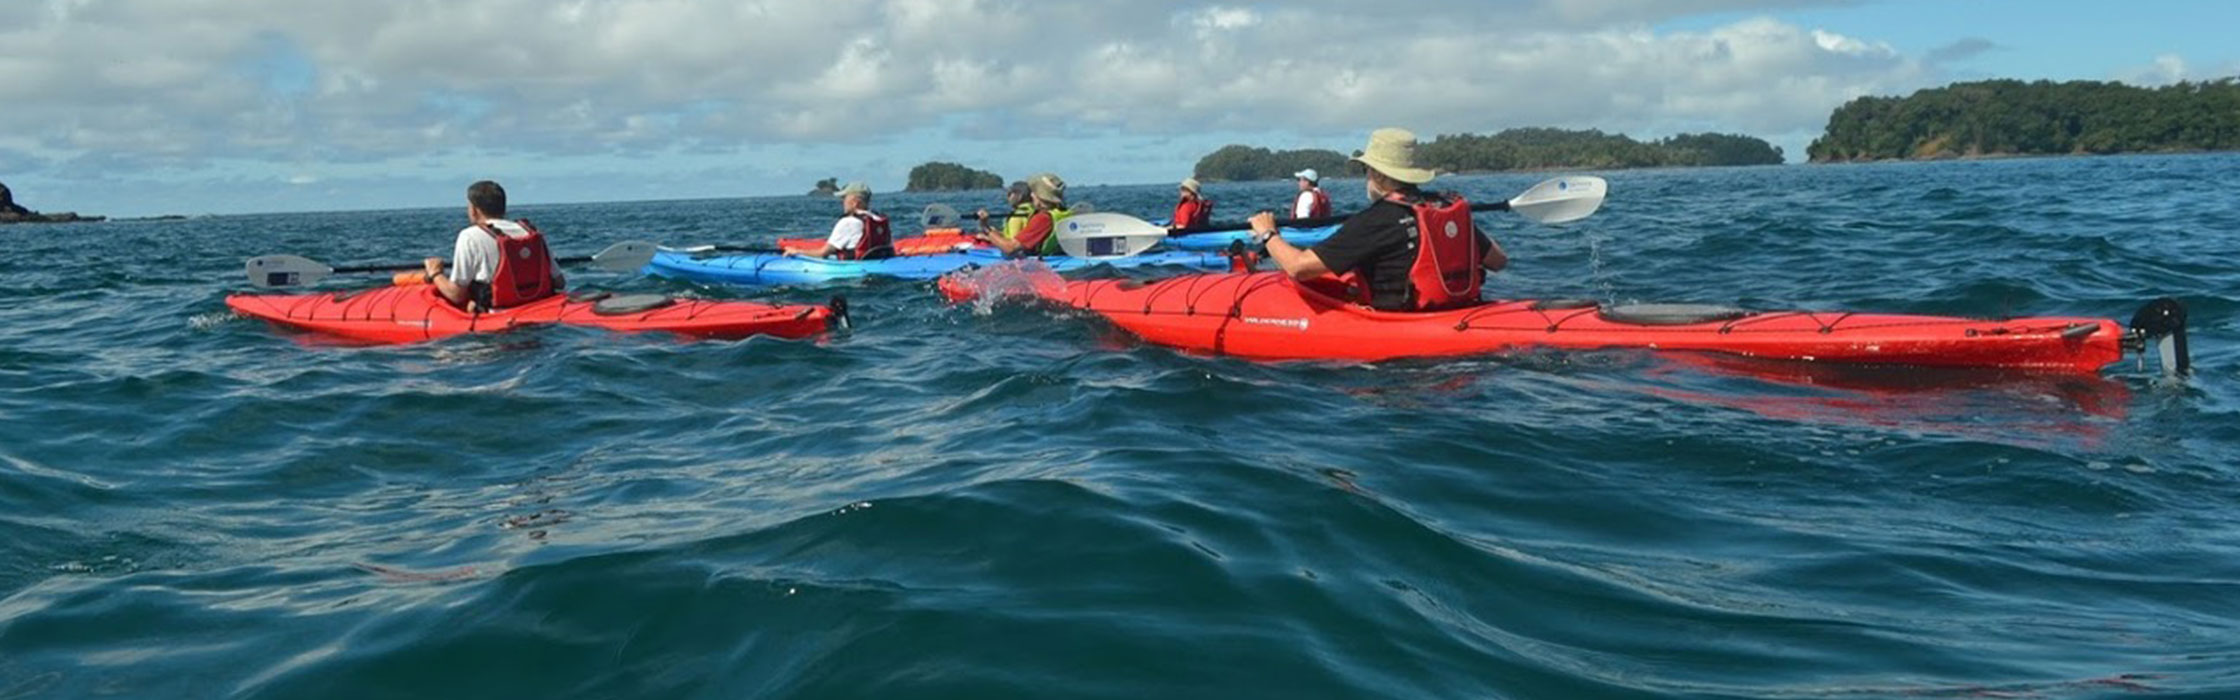 Kayak in the Mangroves in the Gulf of Chiriqui